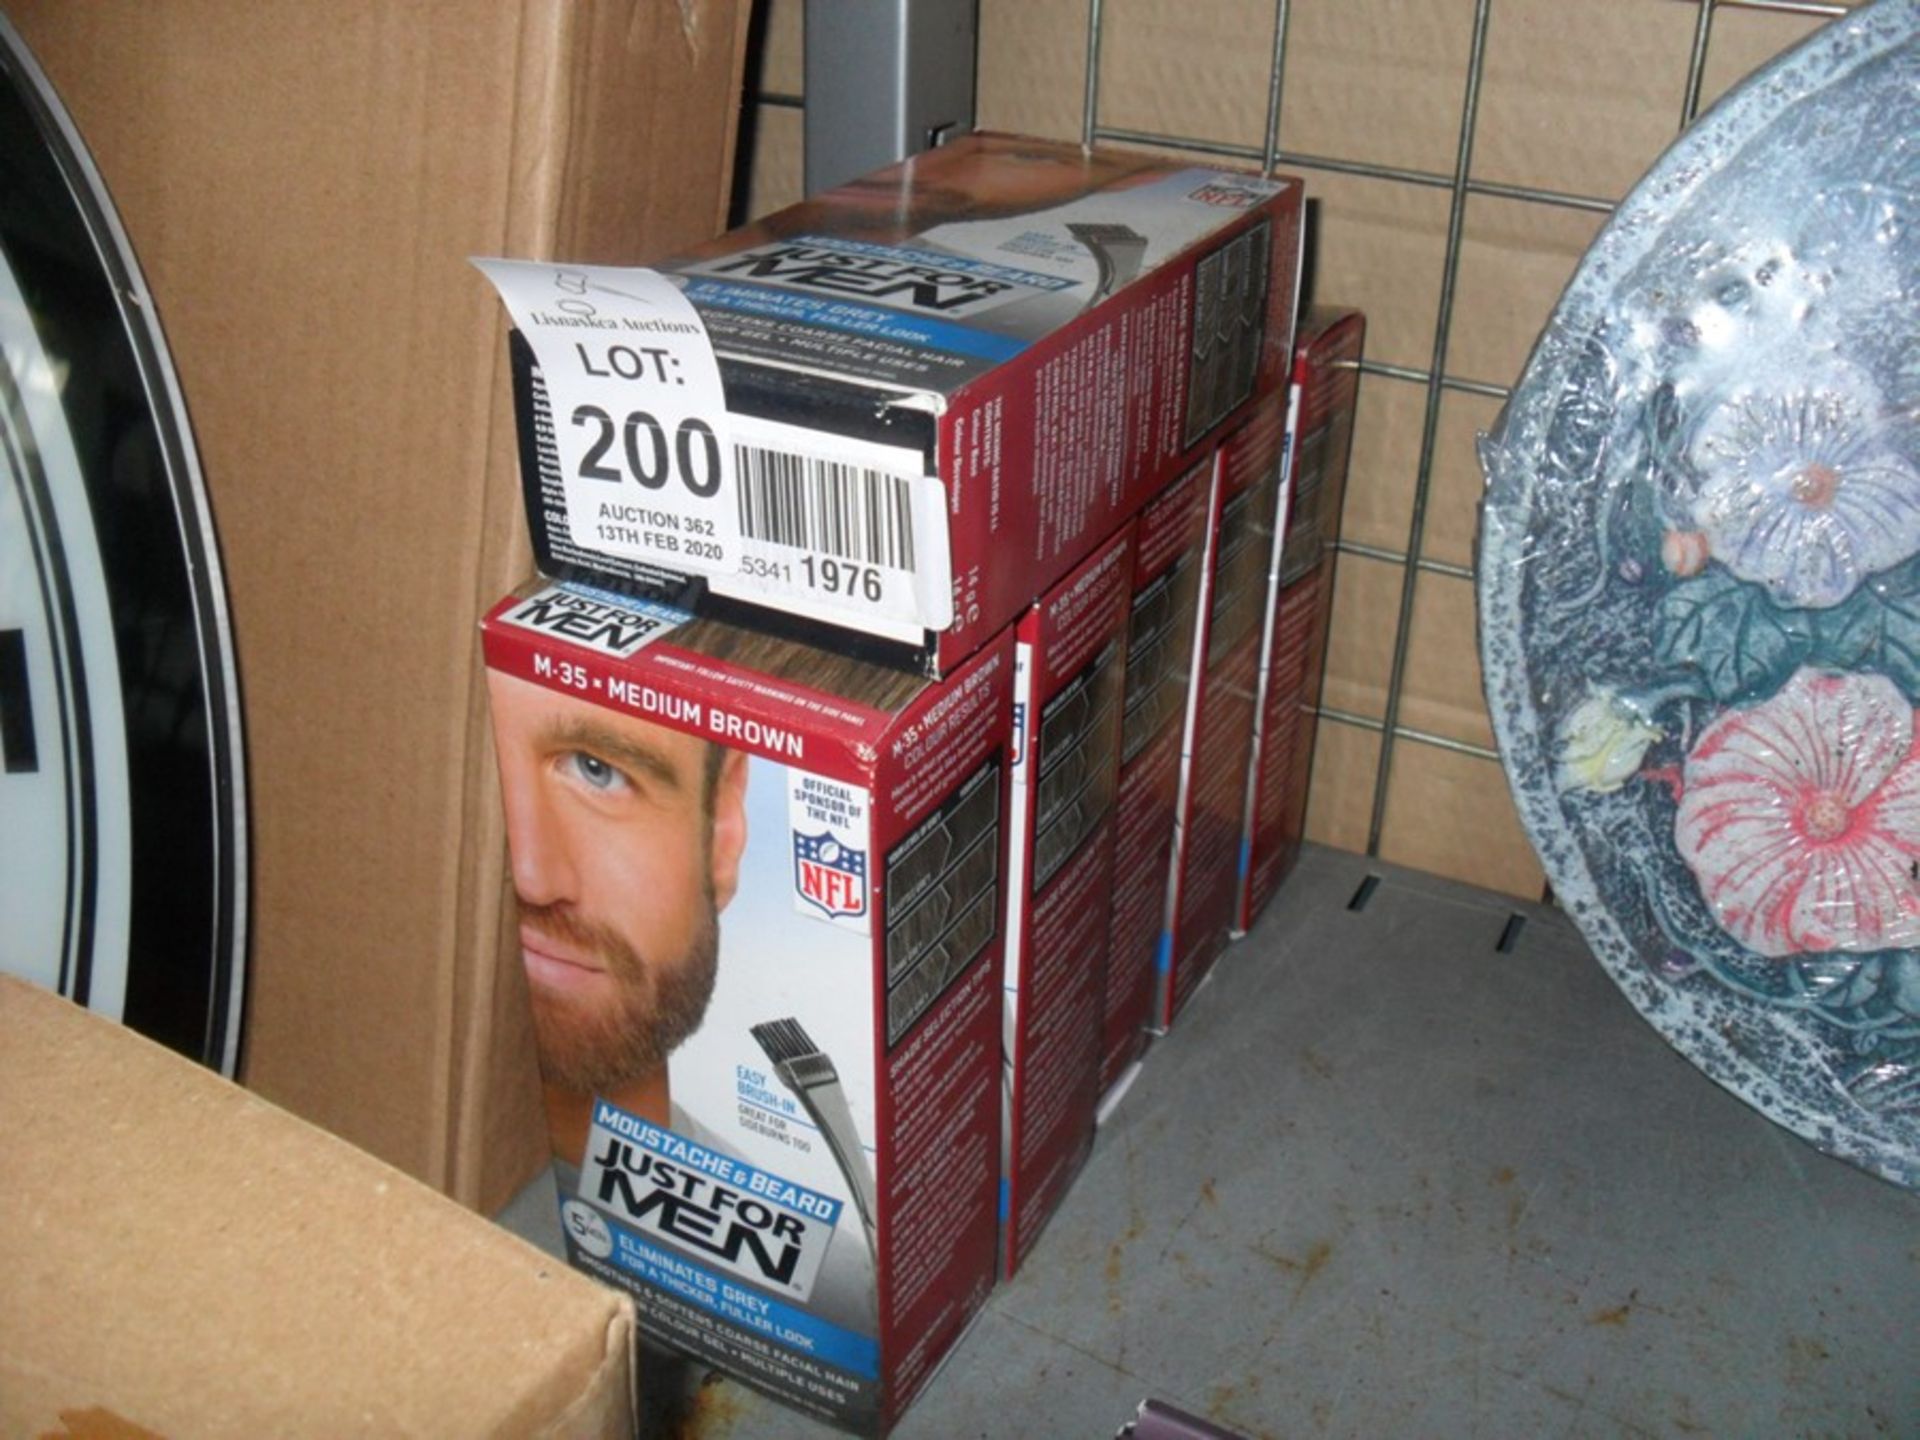 6 BOXES OF JUST FOR MEN HAIR DYE